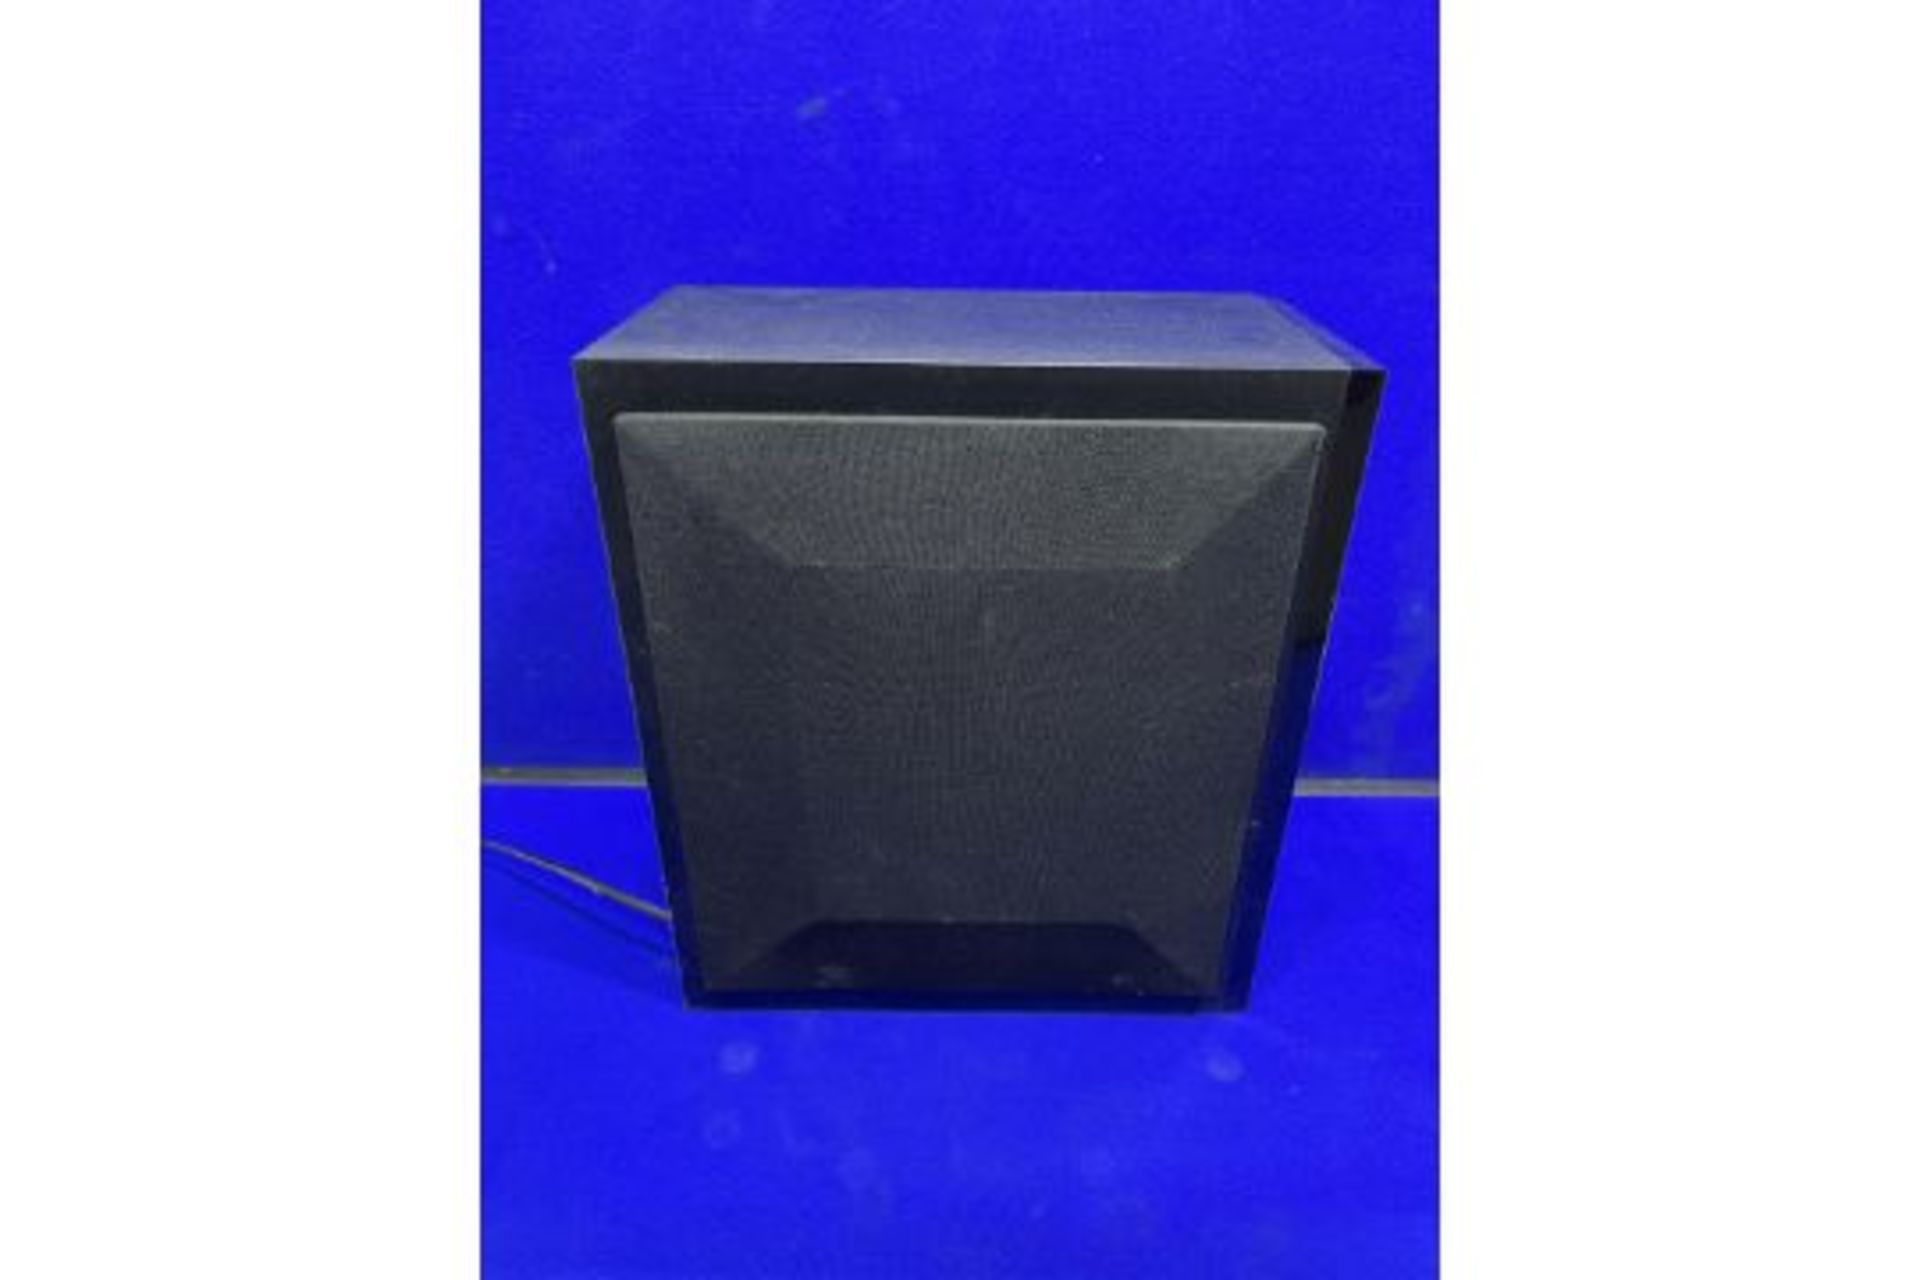 LG S33A1-D BLUETOOTH WIRELESS ACTIVE SUBWOOFER - Image 2 of 4